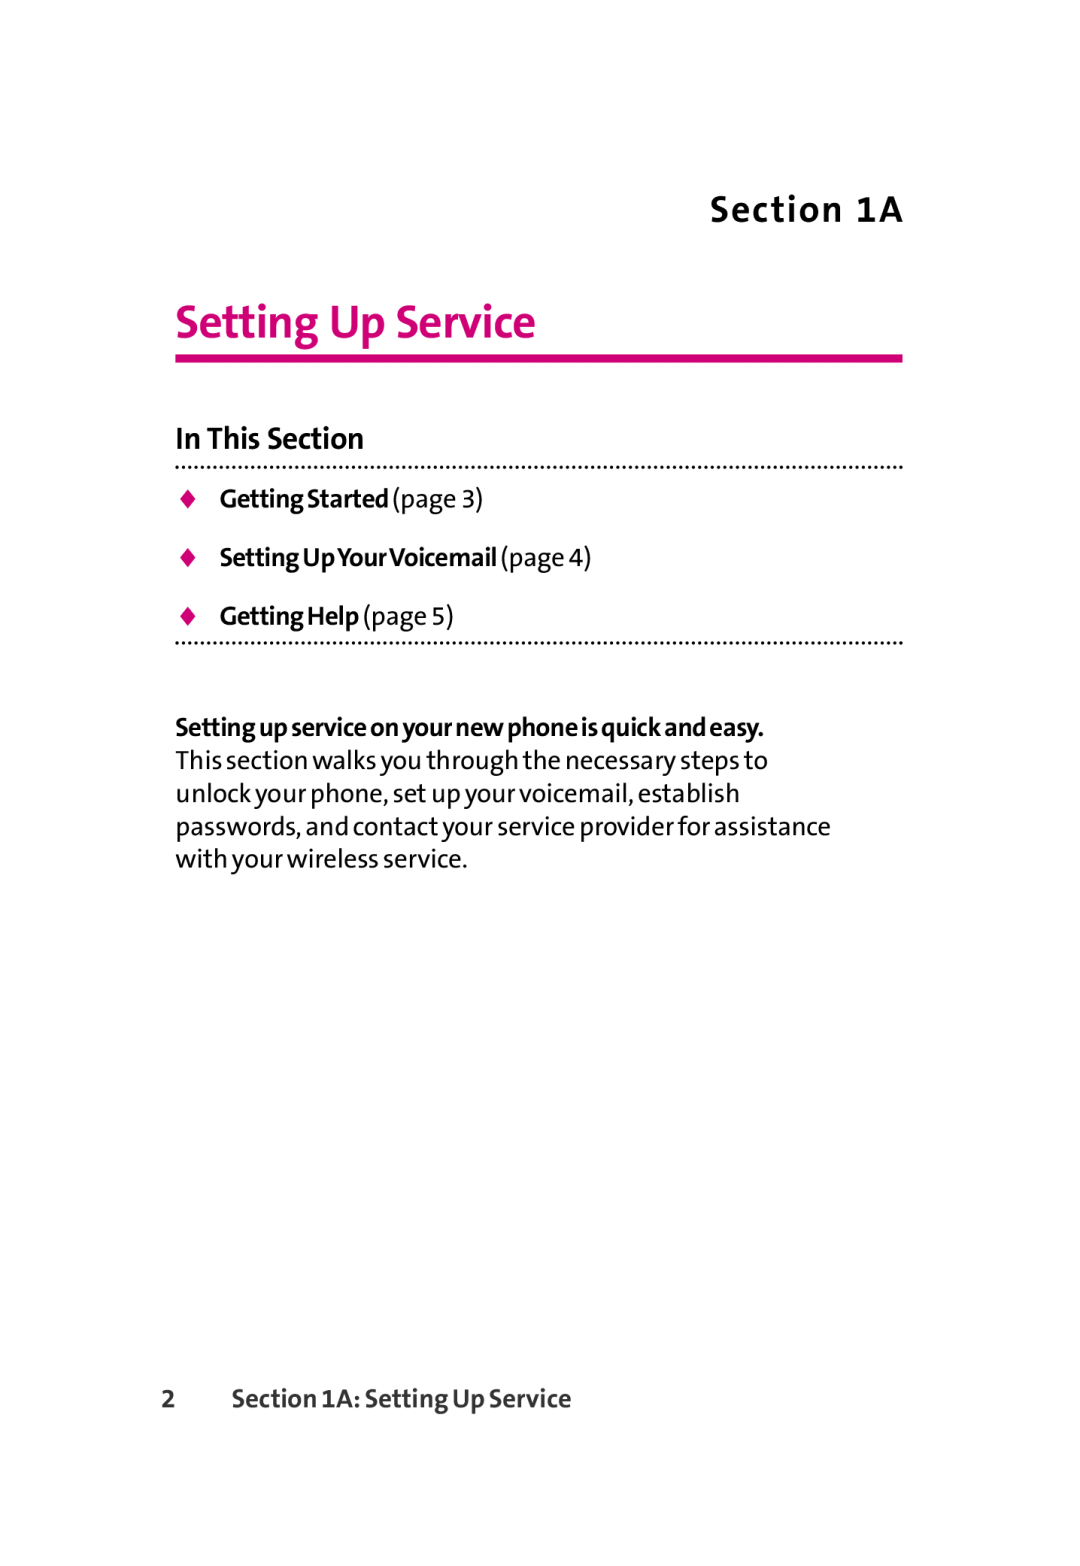 LG Electronics 350 Setting Up Service, A, In This Section, GettingStartedpage SettingUpYourVoicemailpage GettingHelp page 